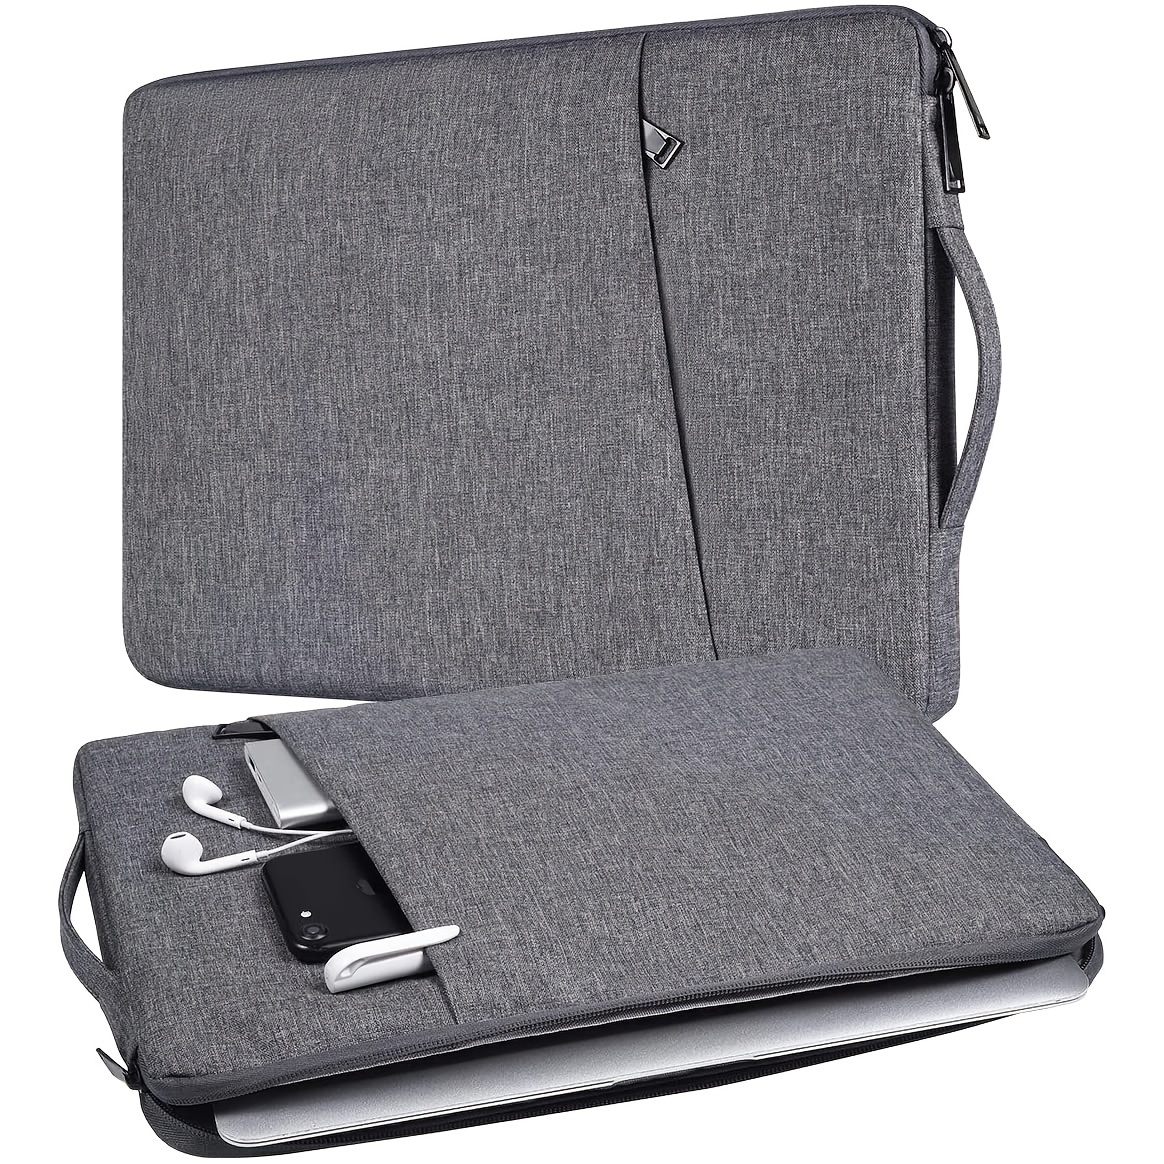 Laptop Sleeve Case With Handle For Macbook Pro/air, Dell Xps/dell